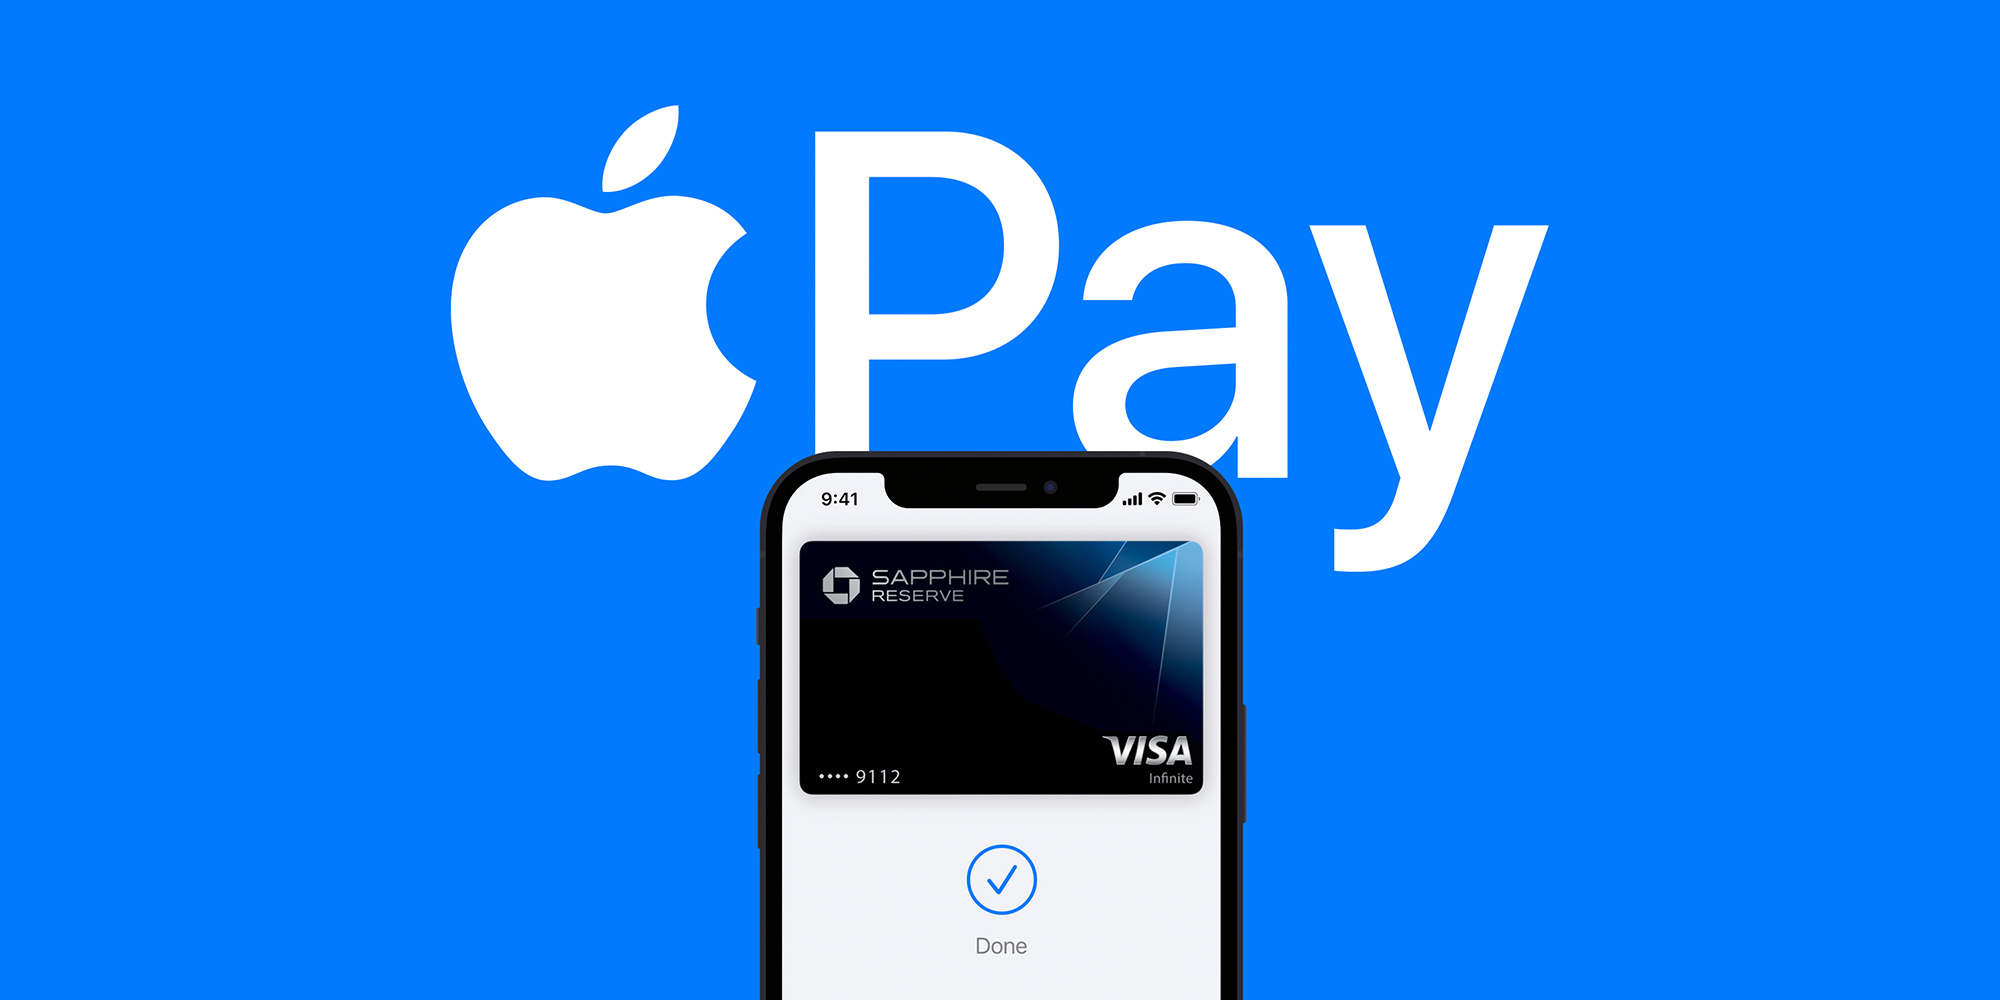 Apple developing new iOS feature to let iPhones to accept NFC payments with  tap-to-pay - 9to5Mac